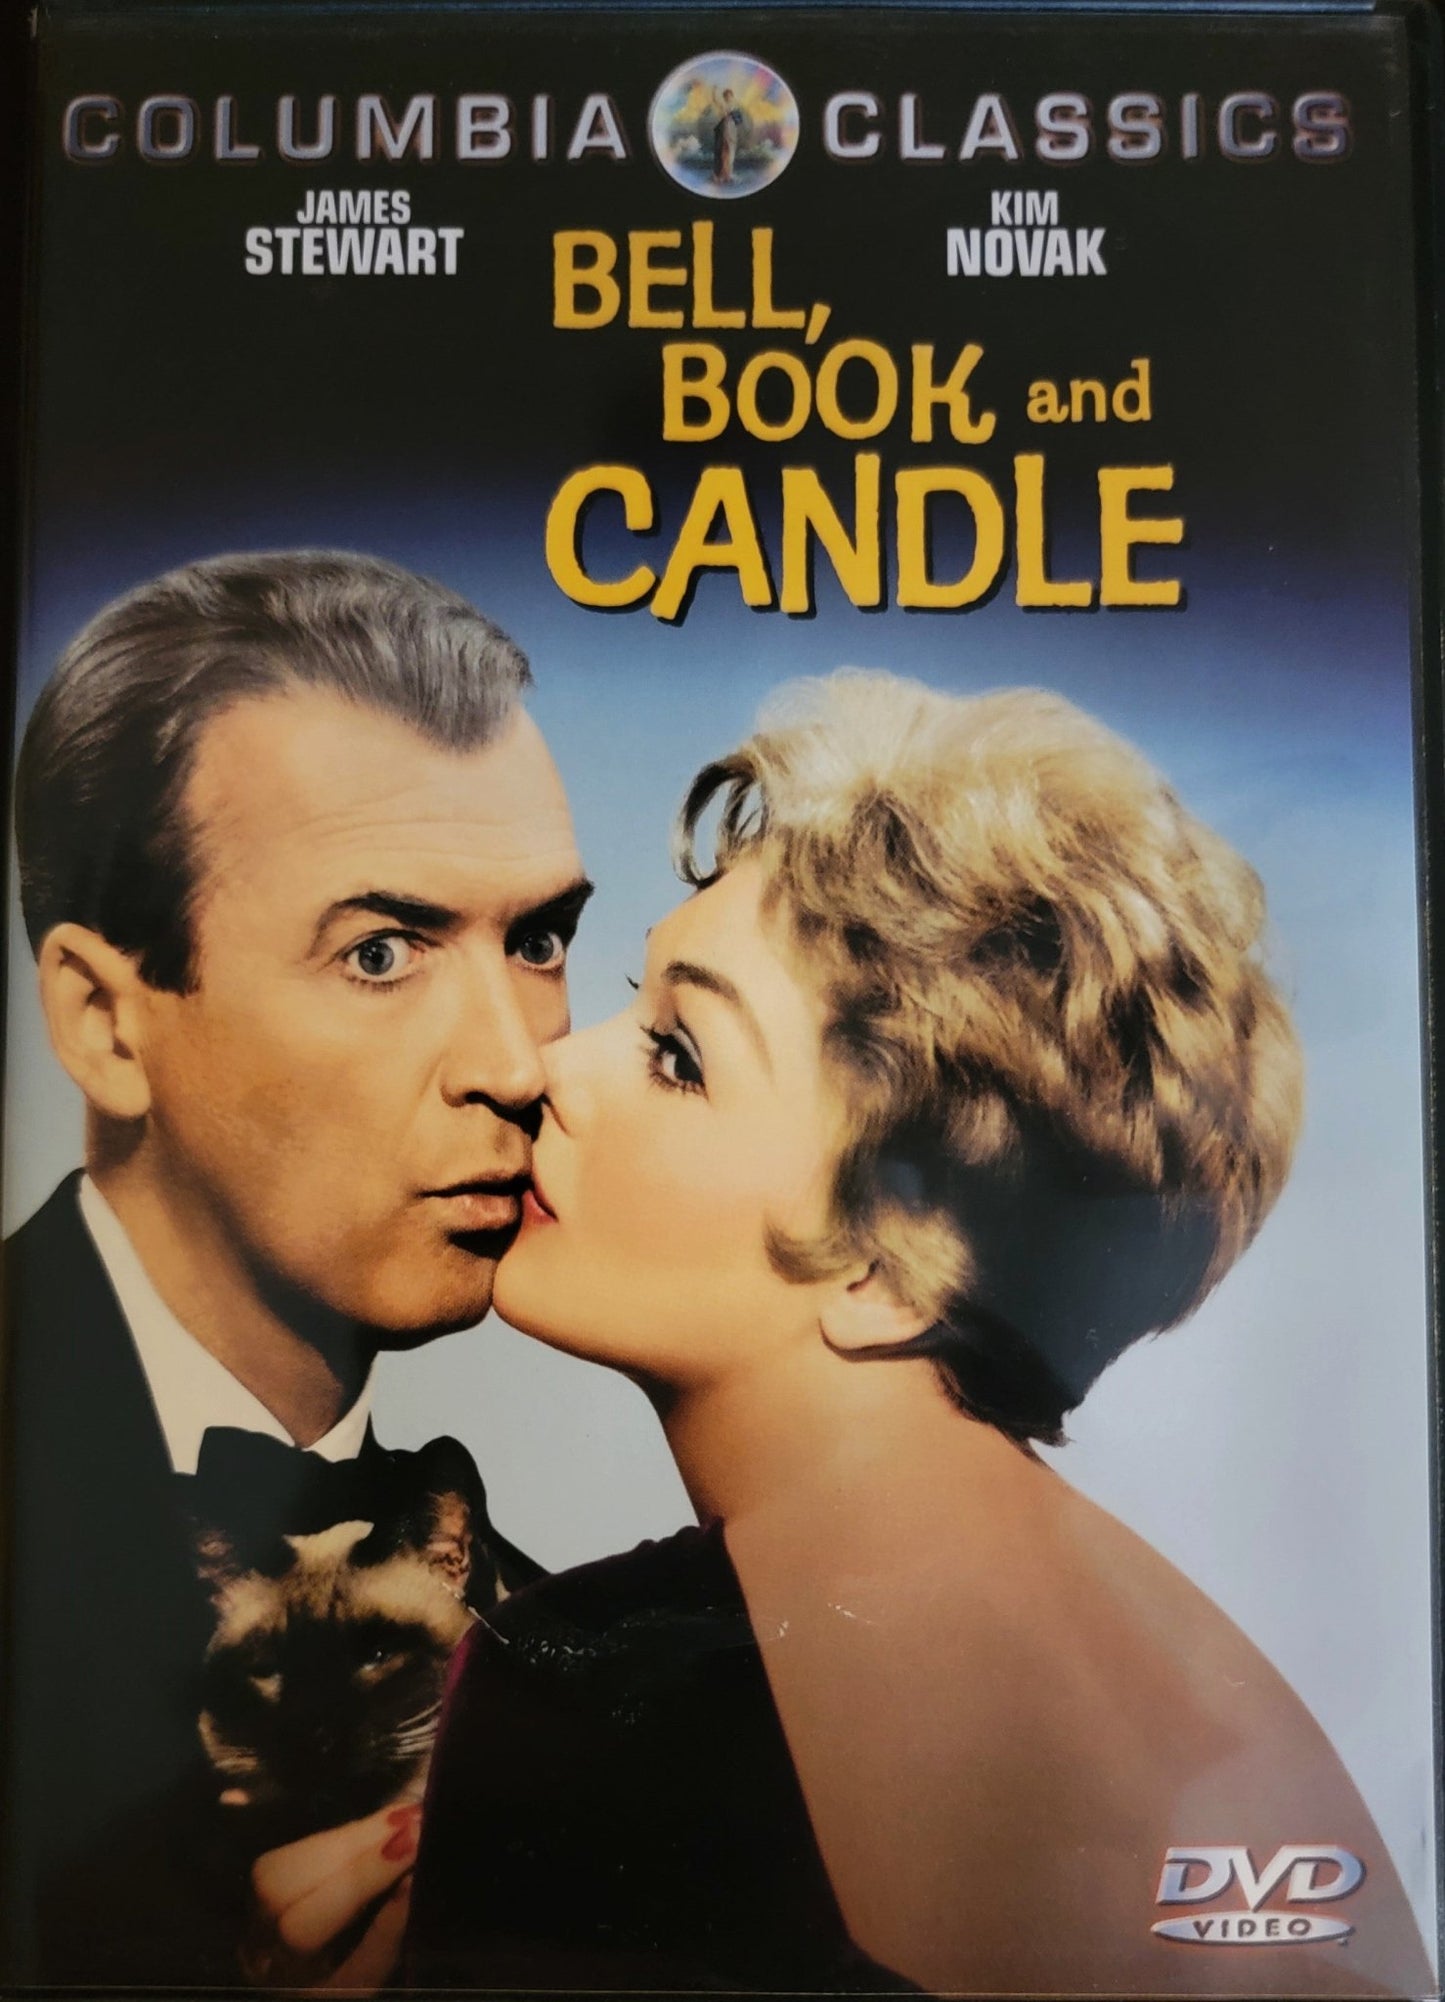 Columbia Classics - Bell Book and Candle | DVD | Widescreen - DVD - Steady Bunny Shop